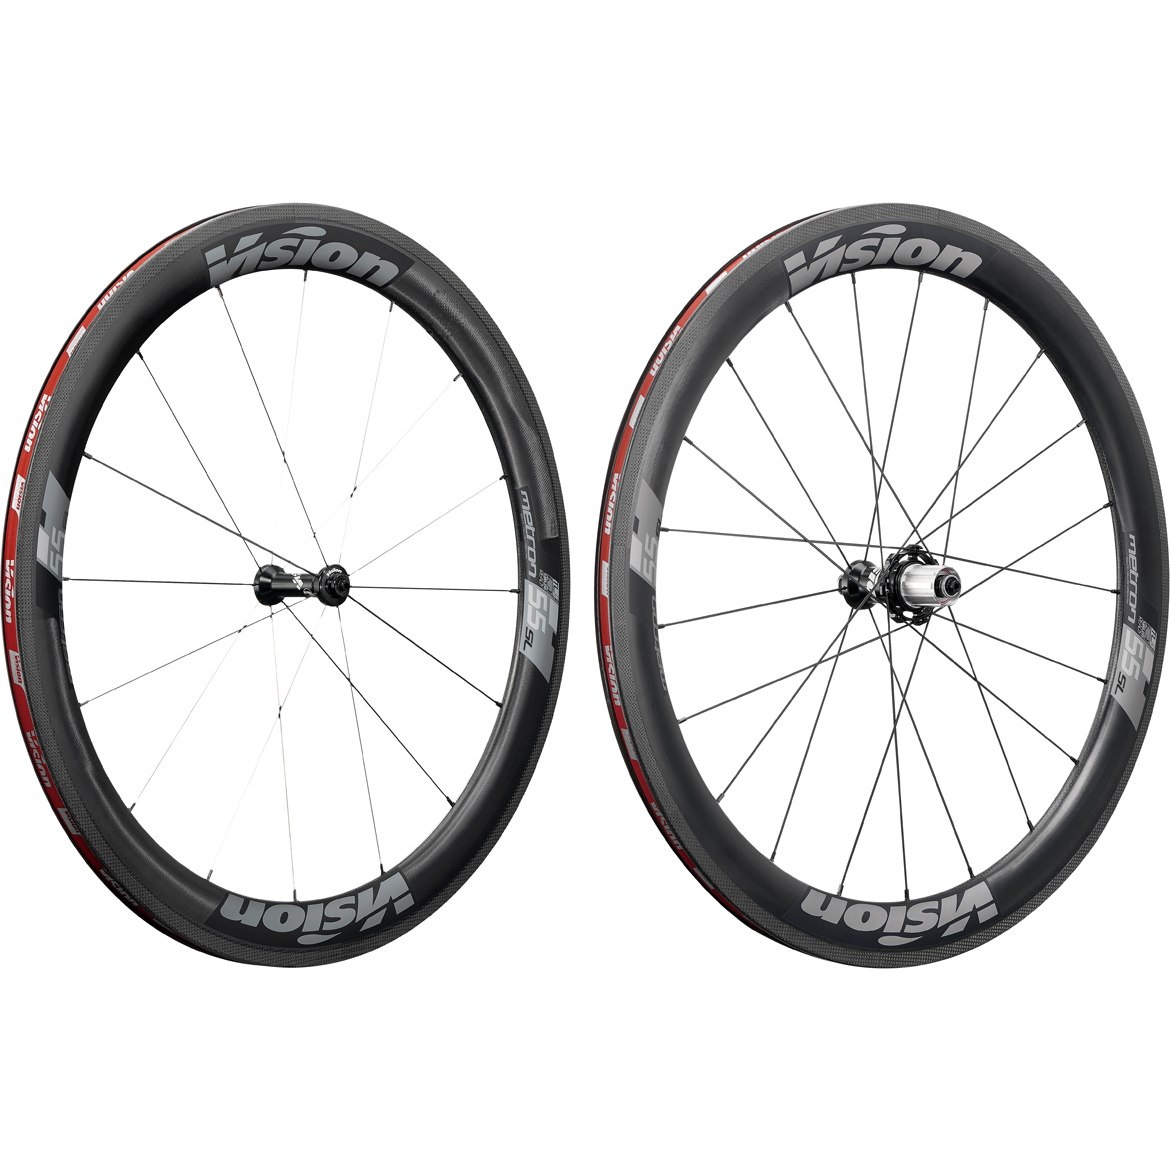 Picture of Vision Metron 55 SL Carbon Wheelset - Tubeless Ready - Clincher - Shimano HG